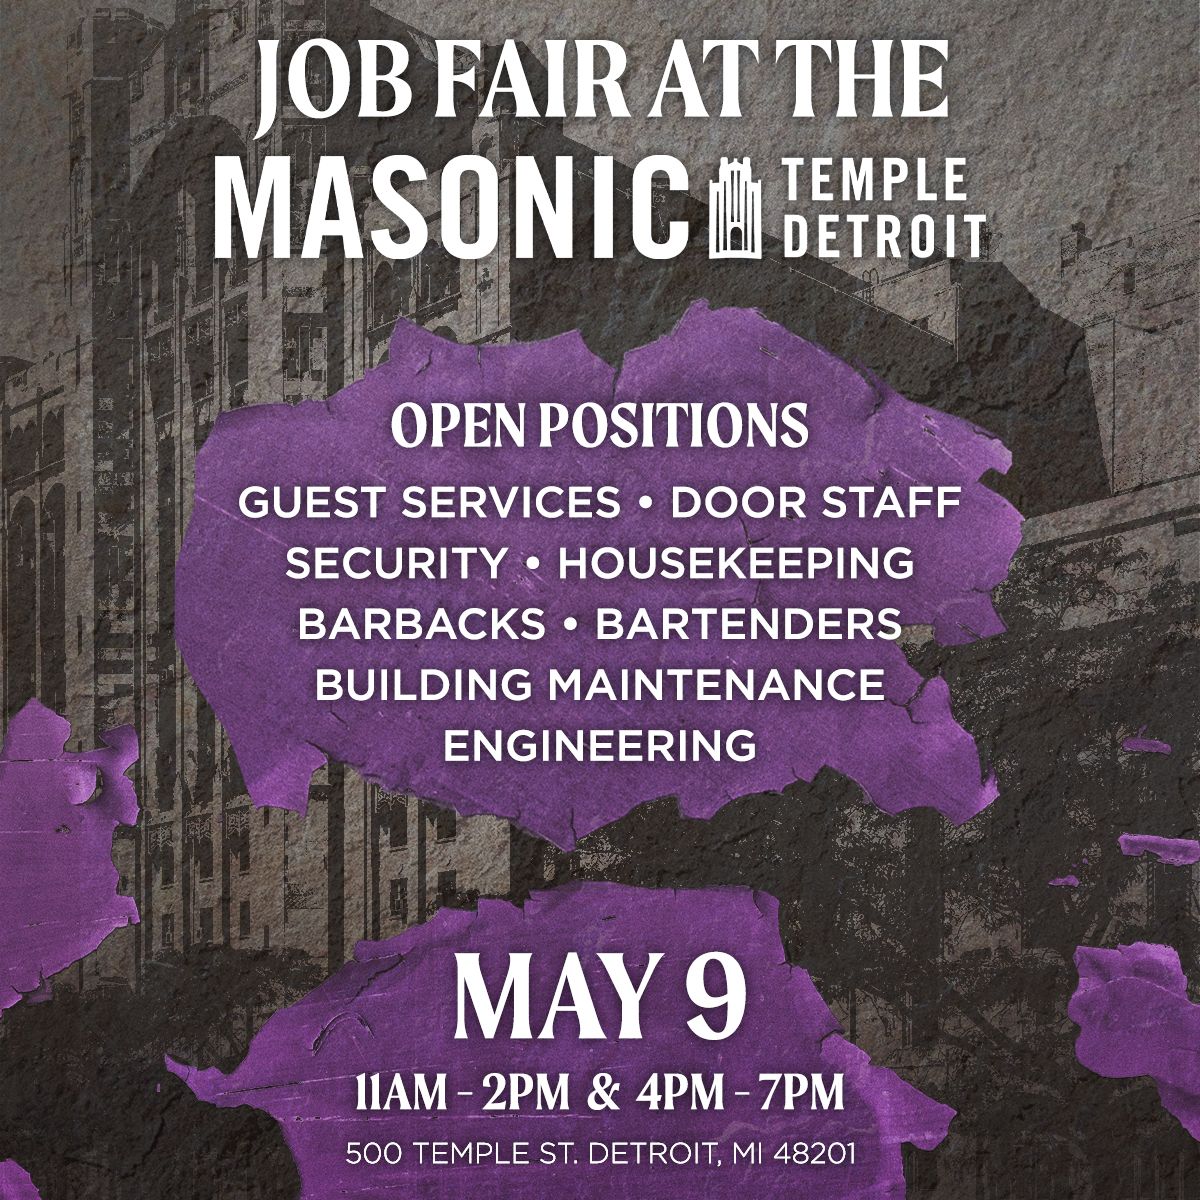 Want to work in the music industry? We’re hiring! Stop by our Job Fair on May 9 to apply 🌟